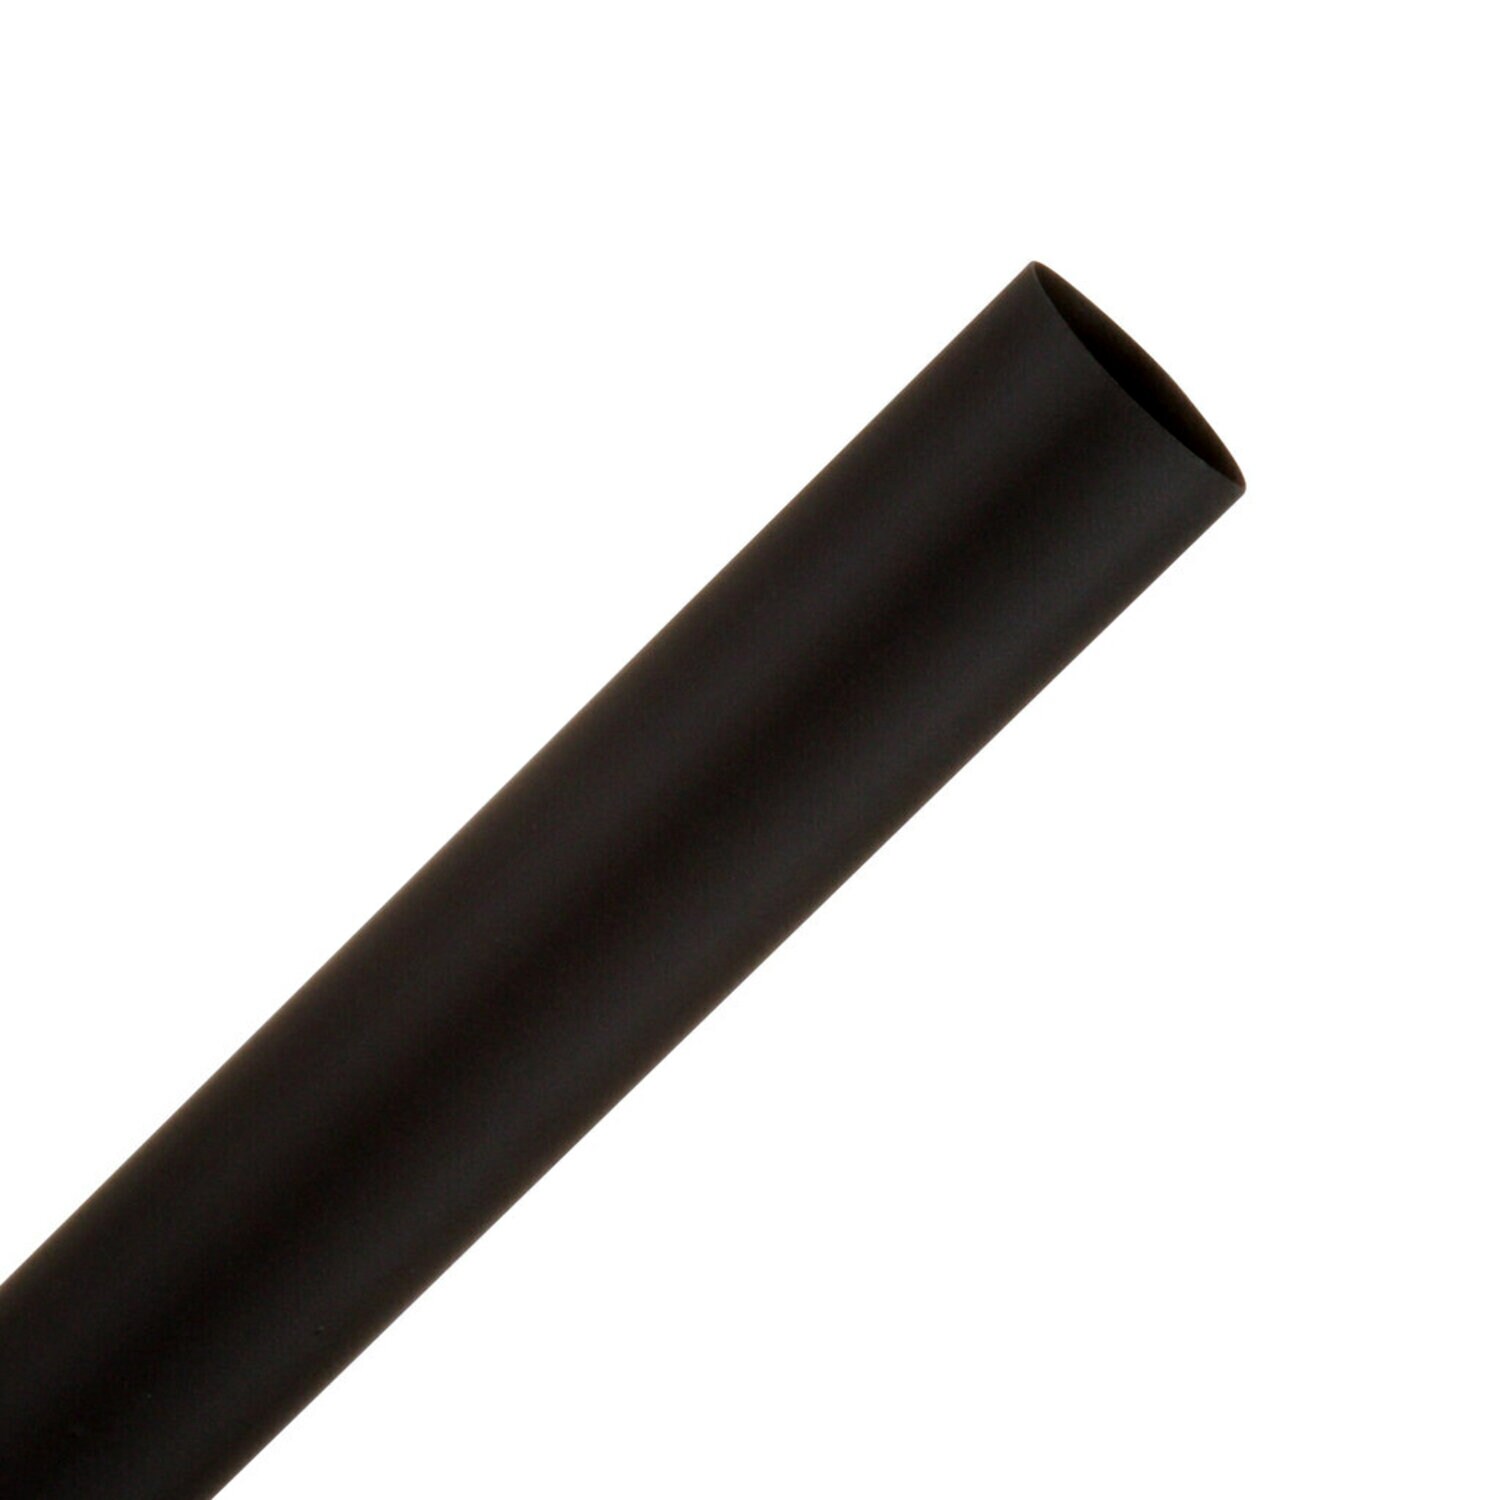 7000133687 - 3M Heat Shrink Thin-Wall Tubing FP-301-1/2-6"-Black-10-10 Pc Pks, 6 in
Length pieces, 10 pieces/pack, 10 packs/case